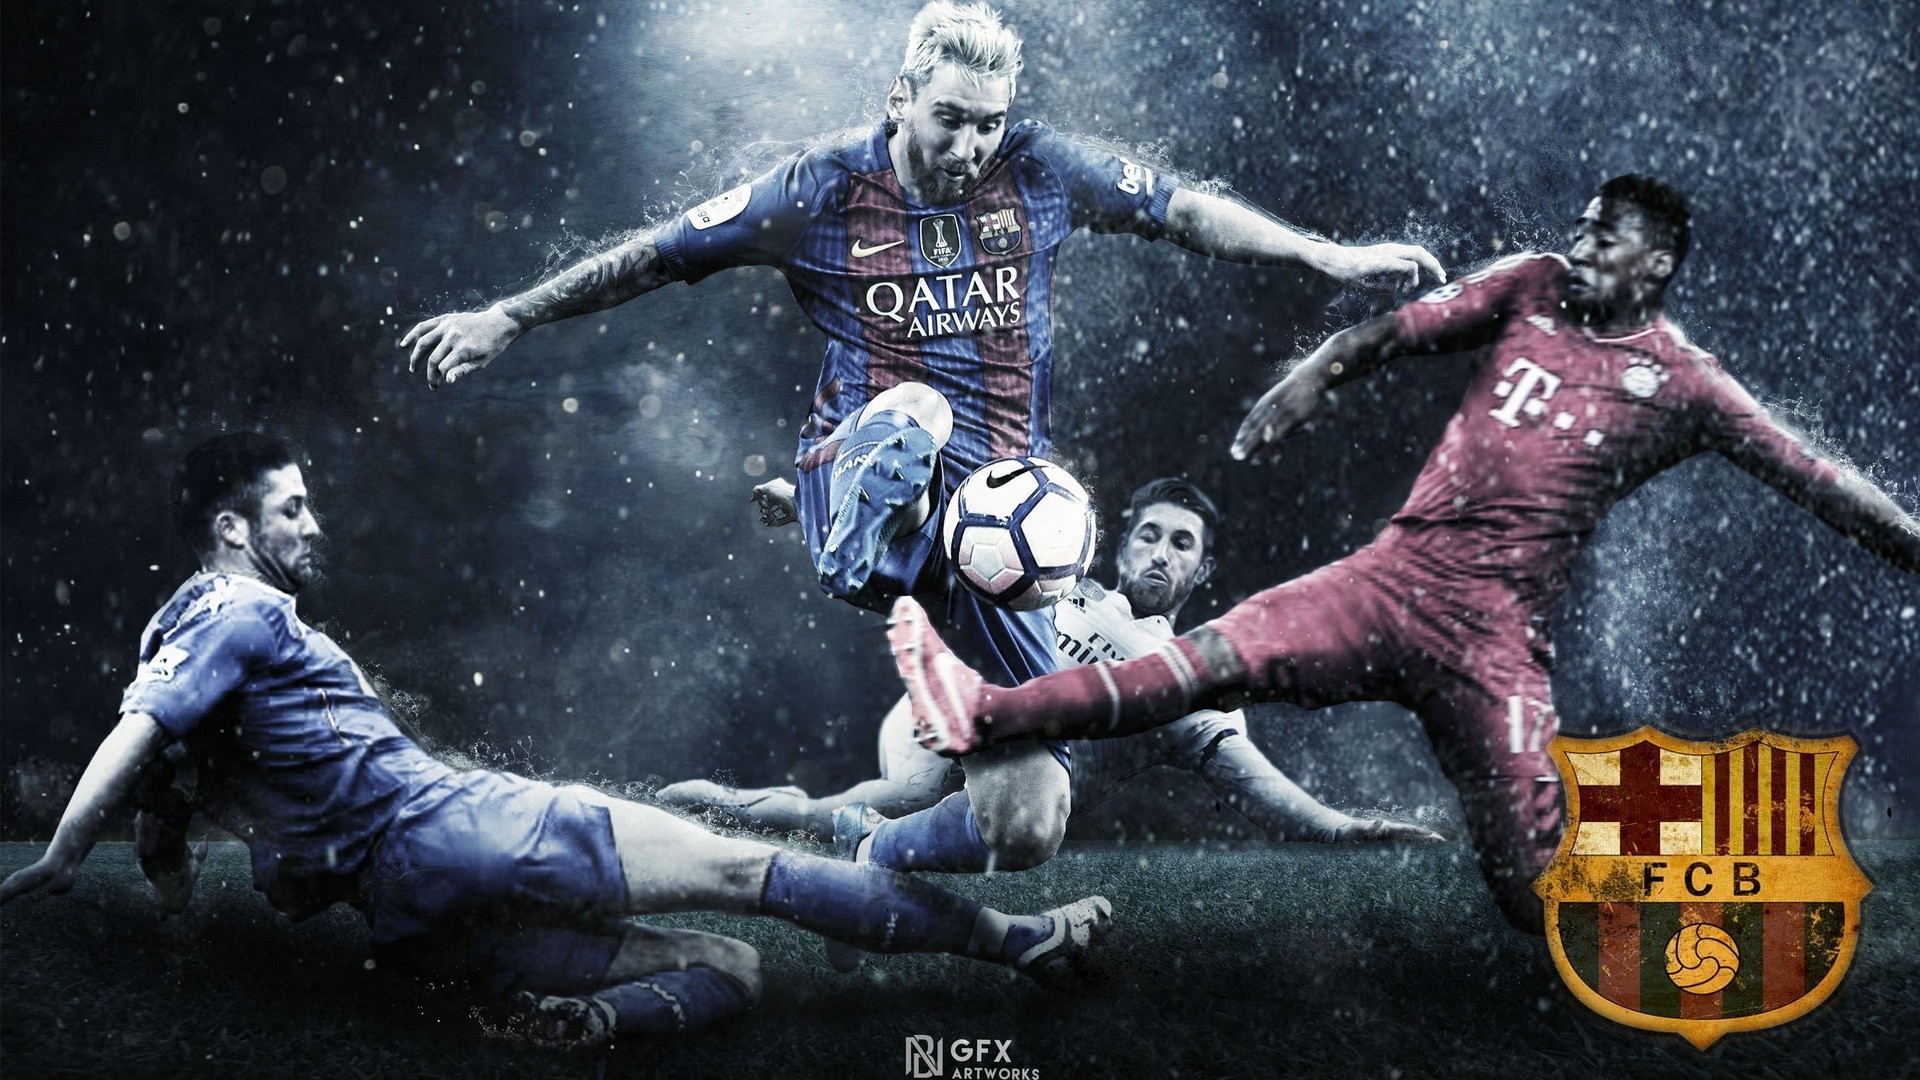 Leo Messi HD Wallpapers With Resolution 1920X1080 pixel. You can make this wallpaper for your Mac or Windows Desktop Background, iPhone, Android or Tablet and another Smartphone device for free